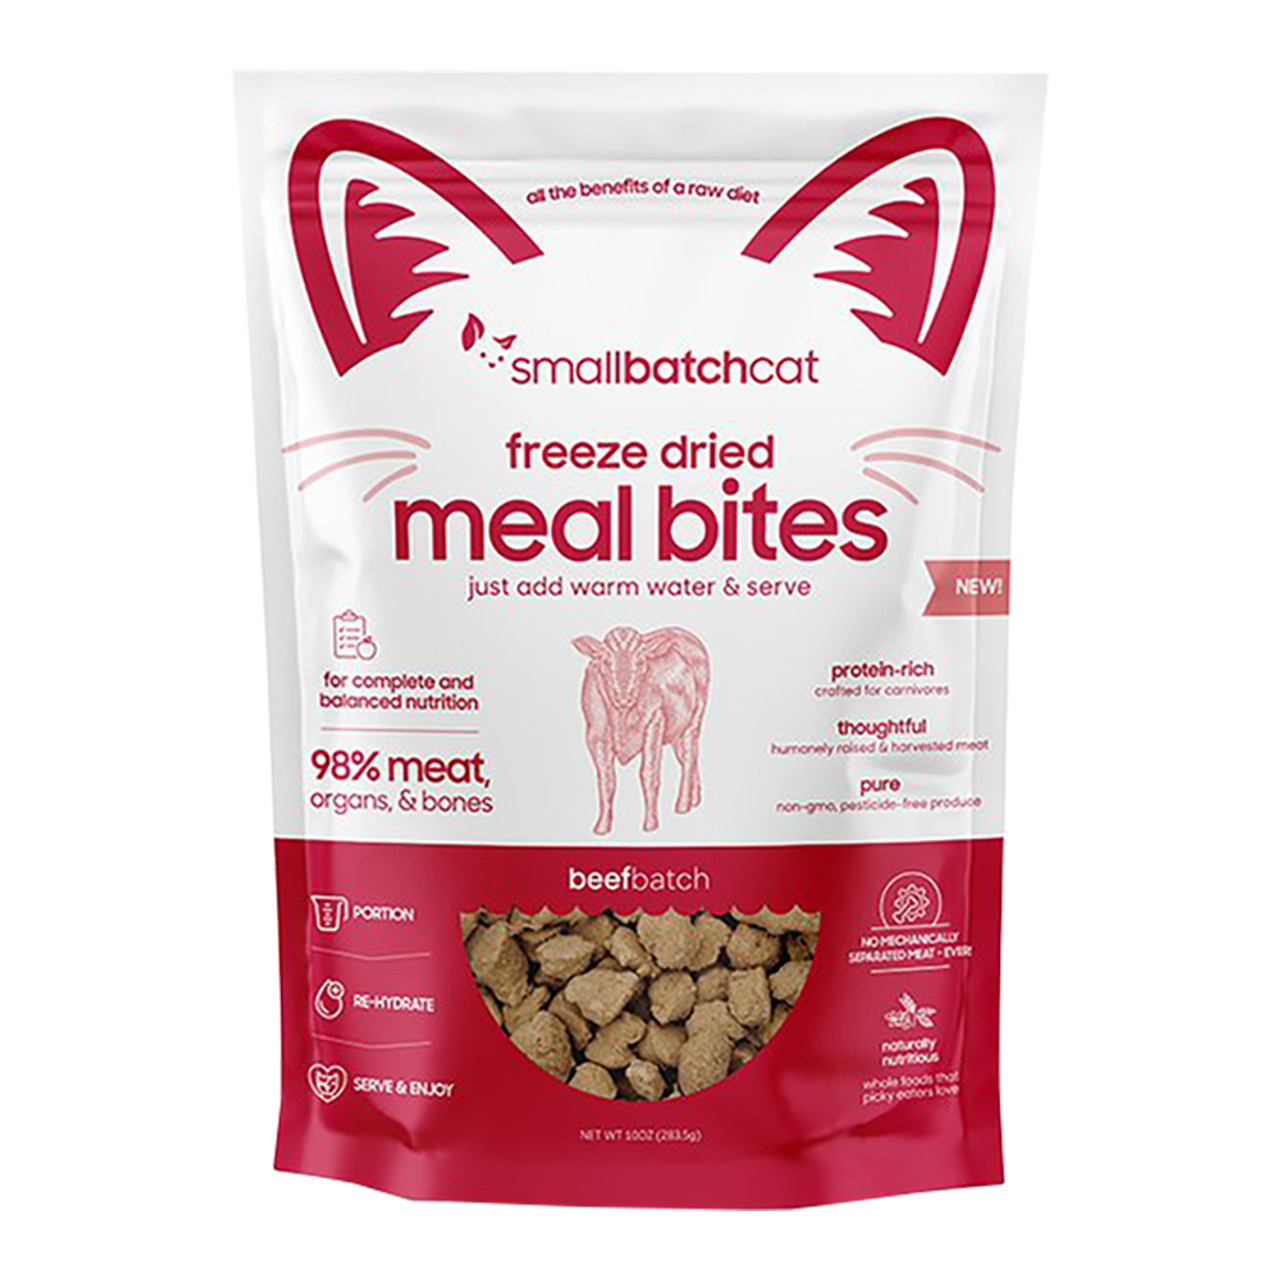 SmallBatch Cat Freeze Dried Meal Bites